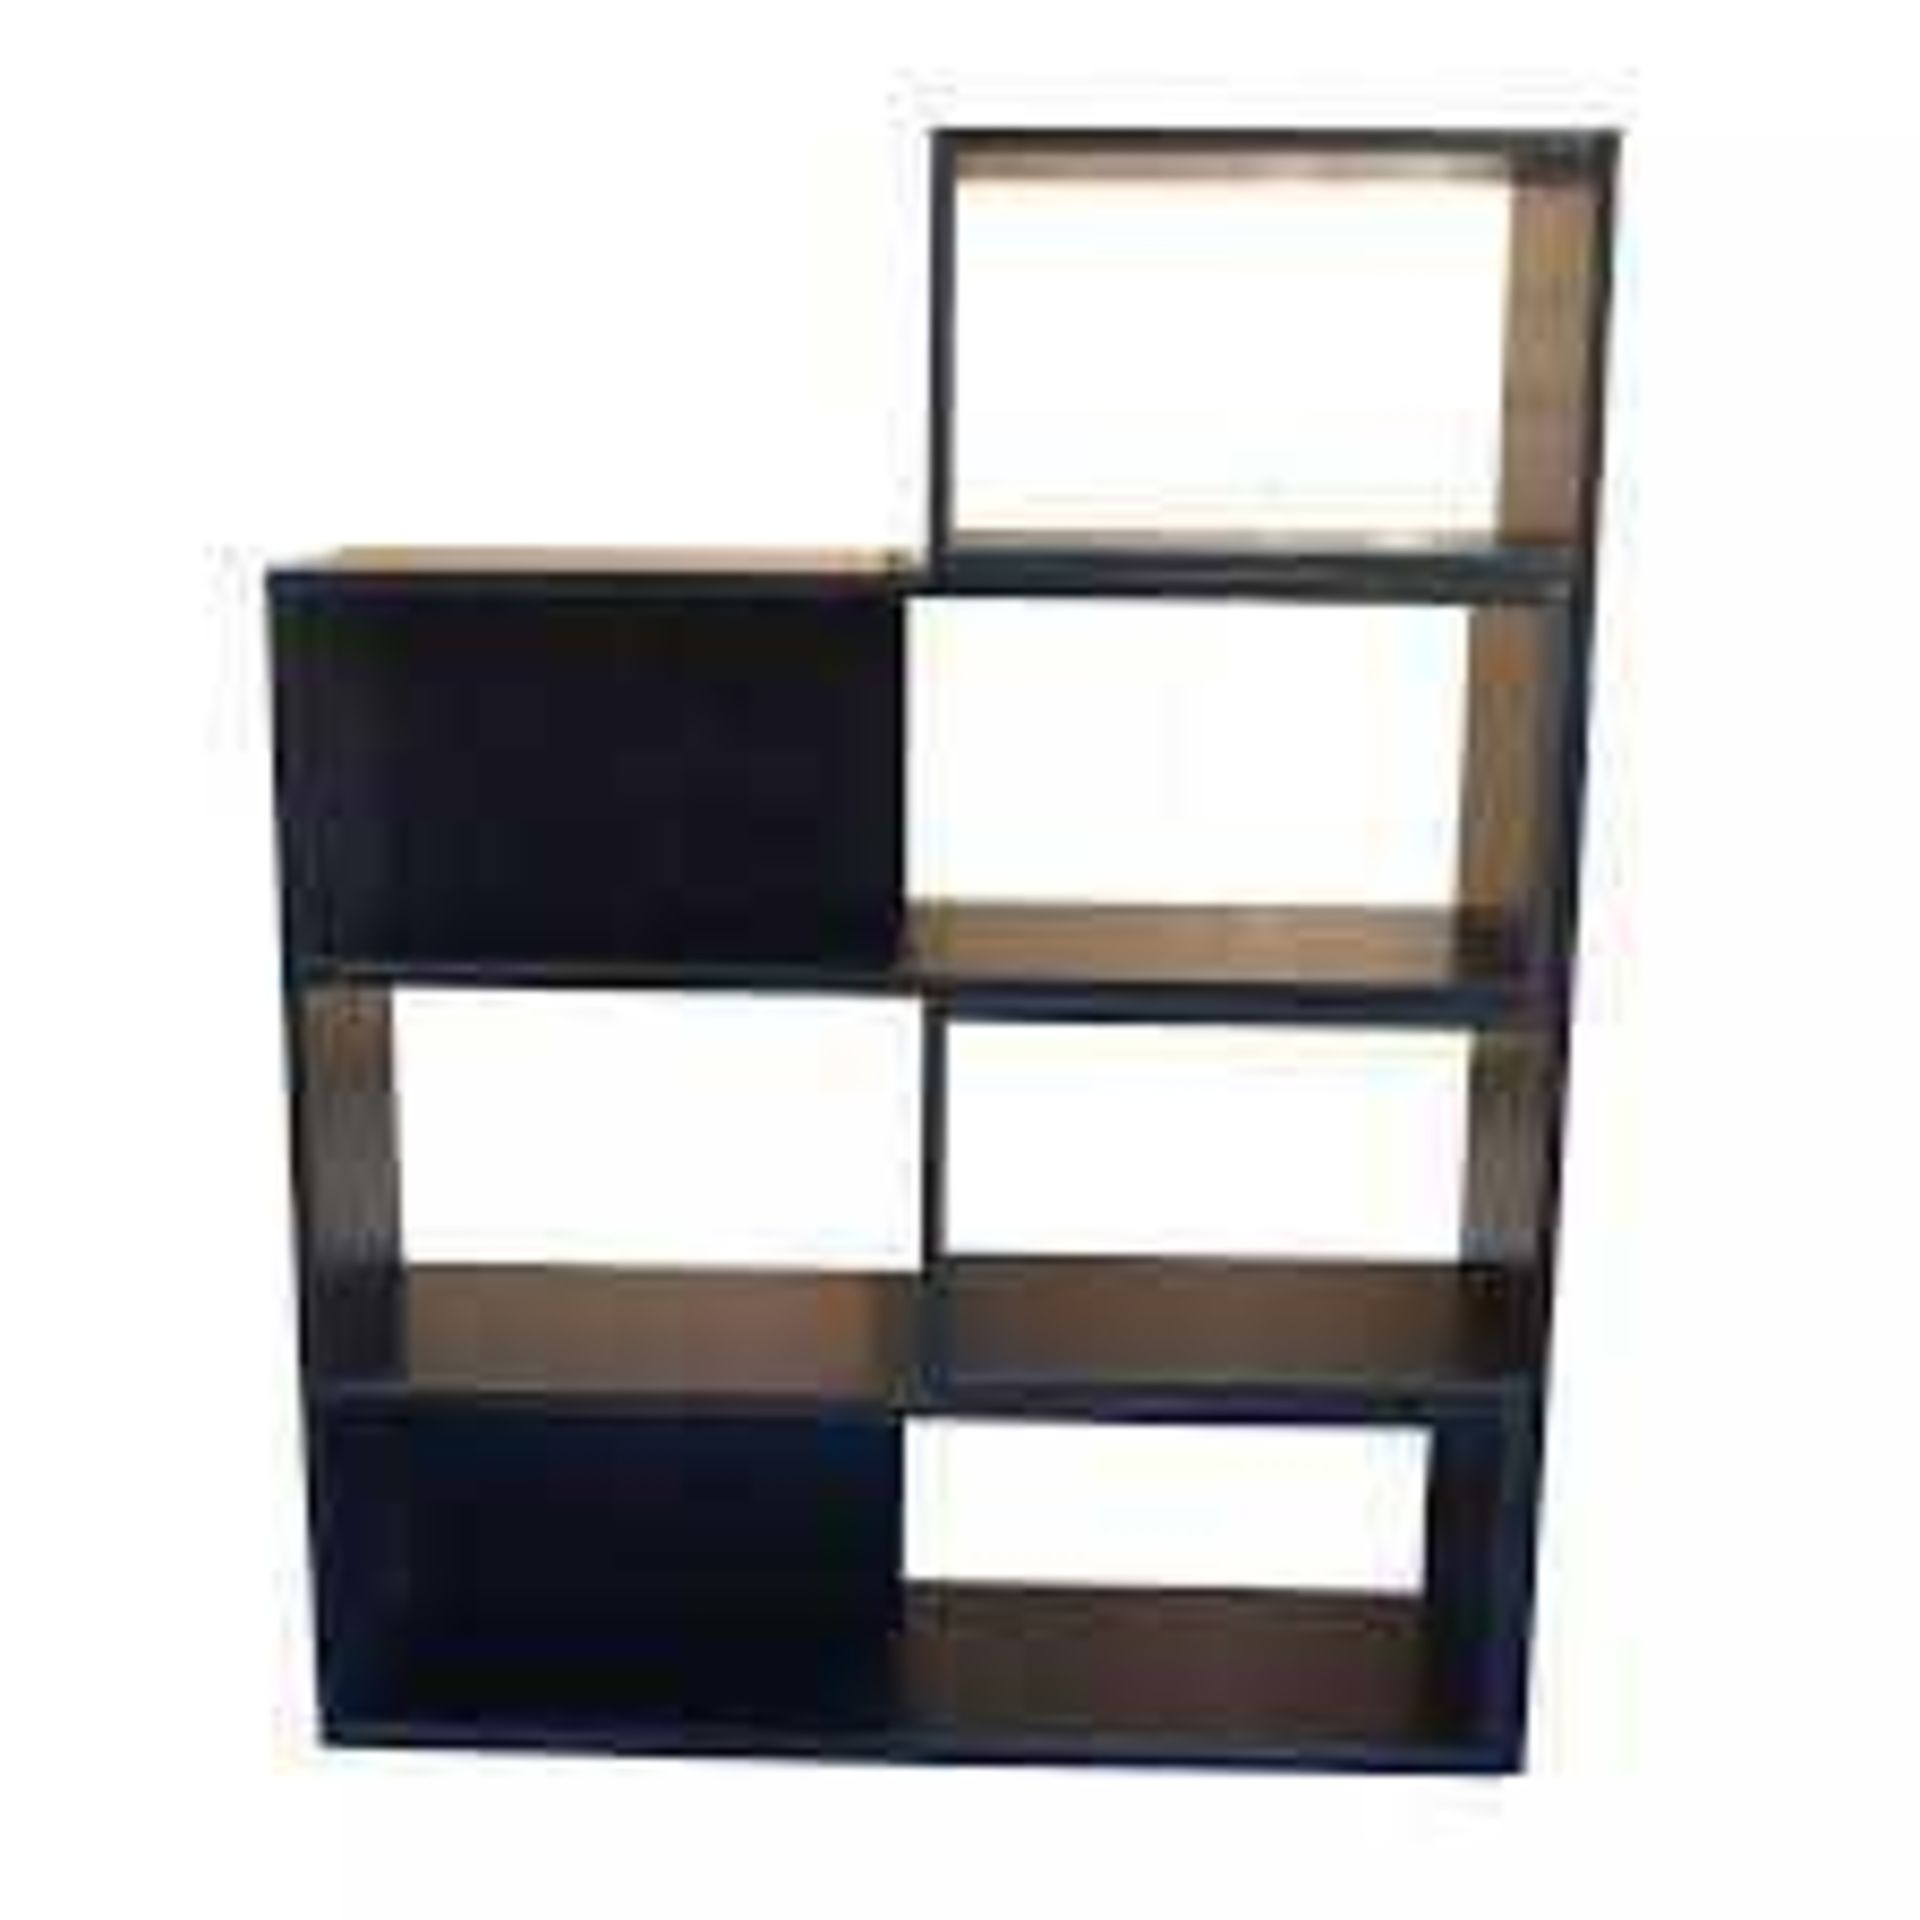 RRP £600 Sourced From Debenhams Brand New Boxed Fenton Adjustable Shelving Unit In Black (Appraisals - Image 2 of 2